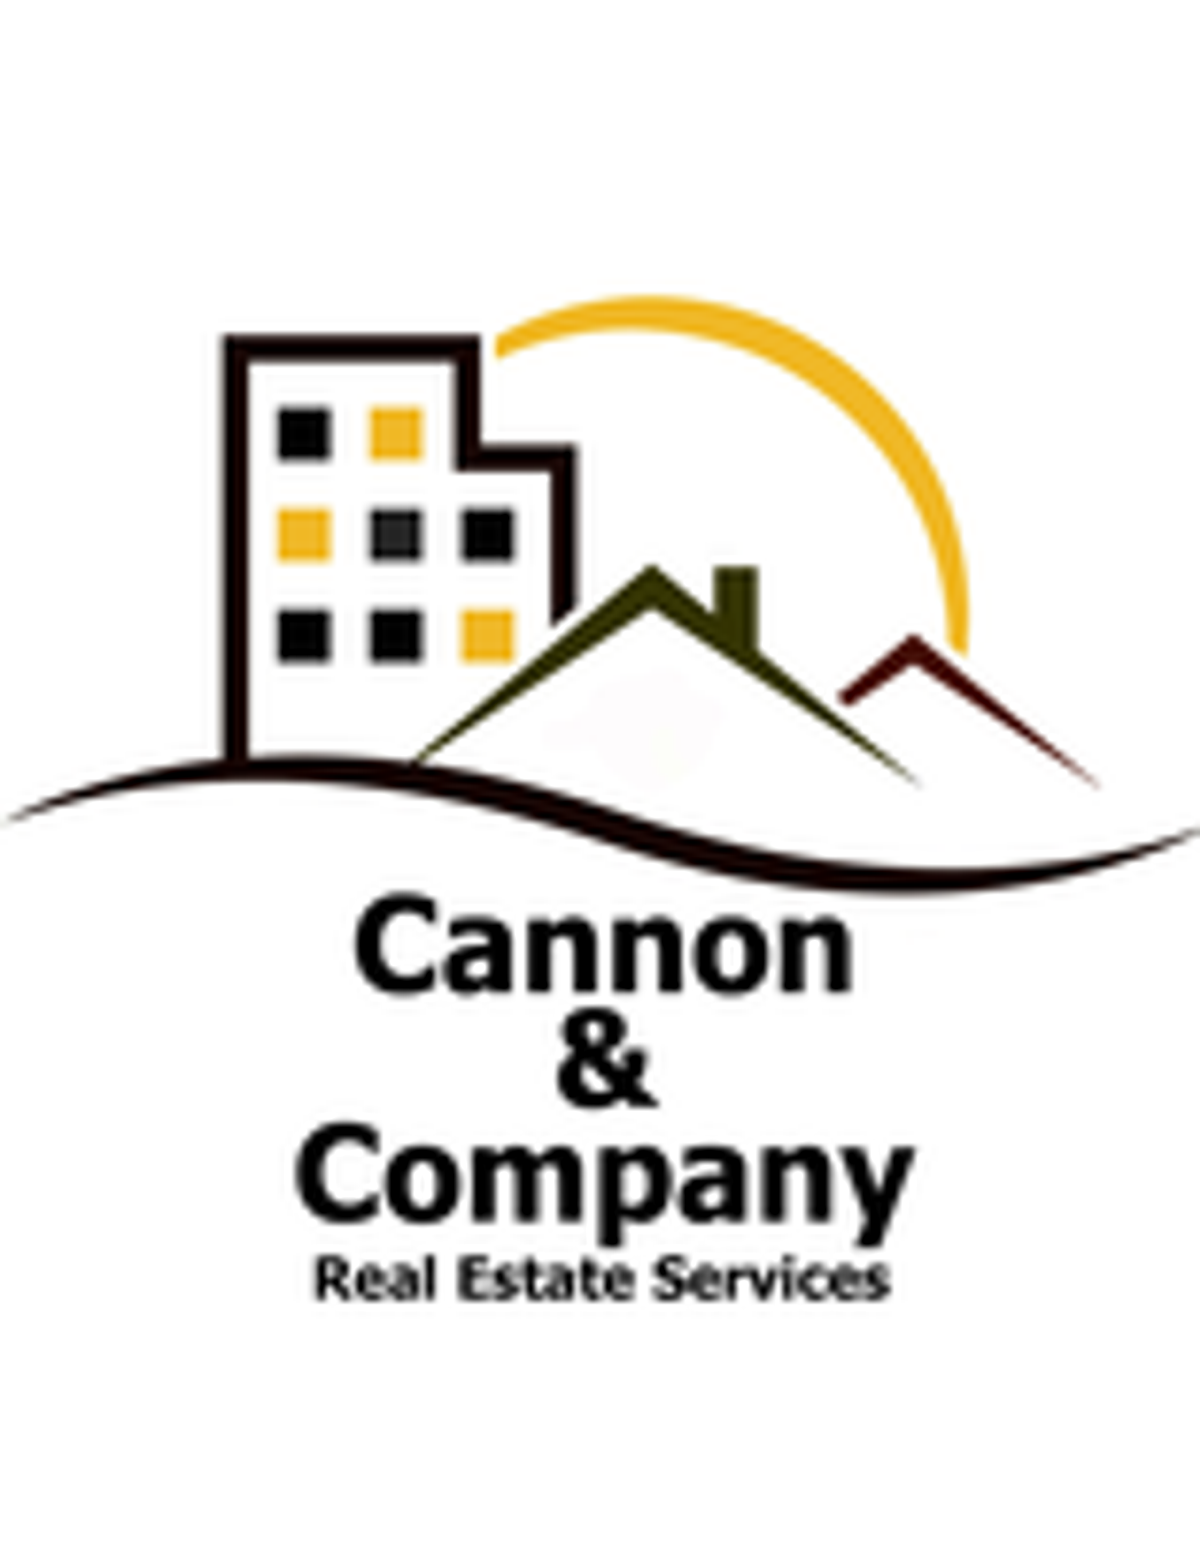 Photo for Tyson Leavitt, Listing Agent at Cannon & Company